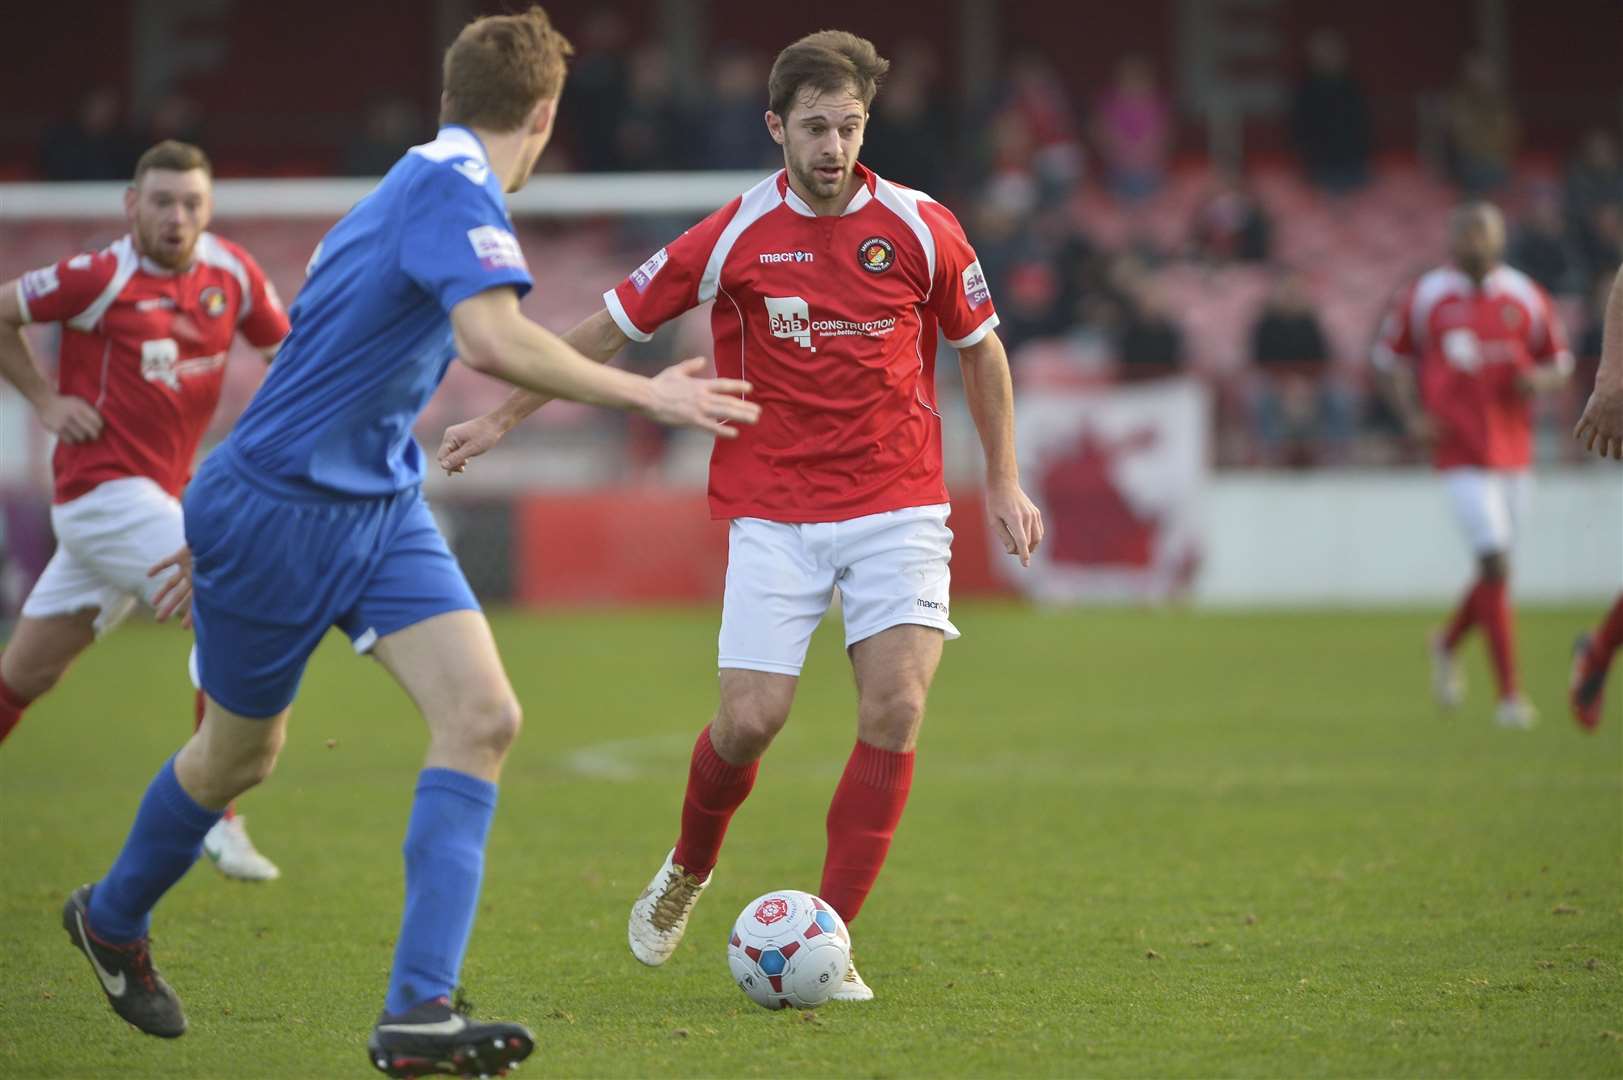 Michael West in action for.Ebbsfleet United back in 2014